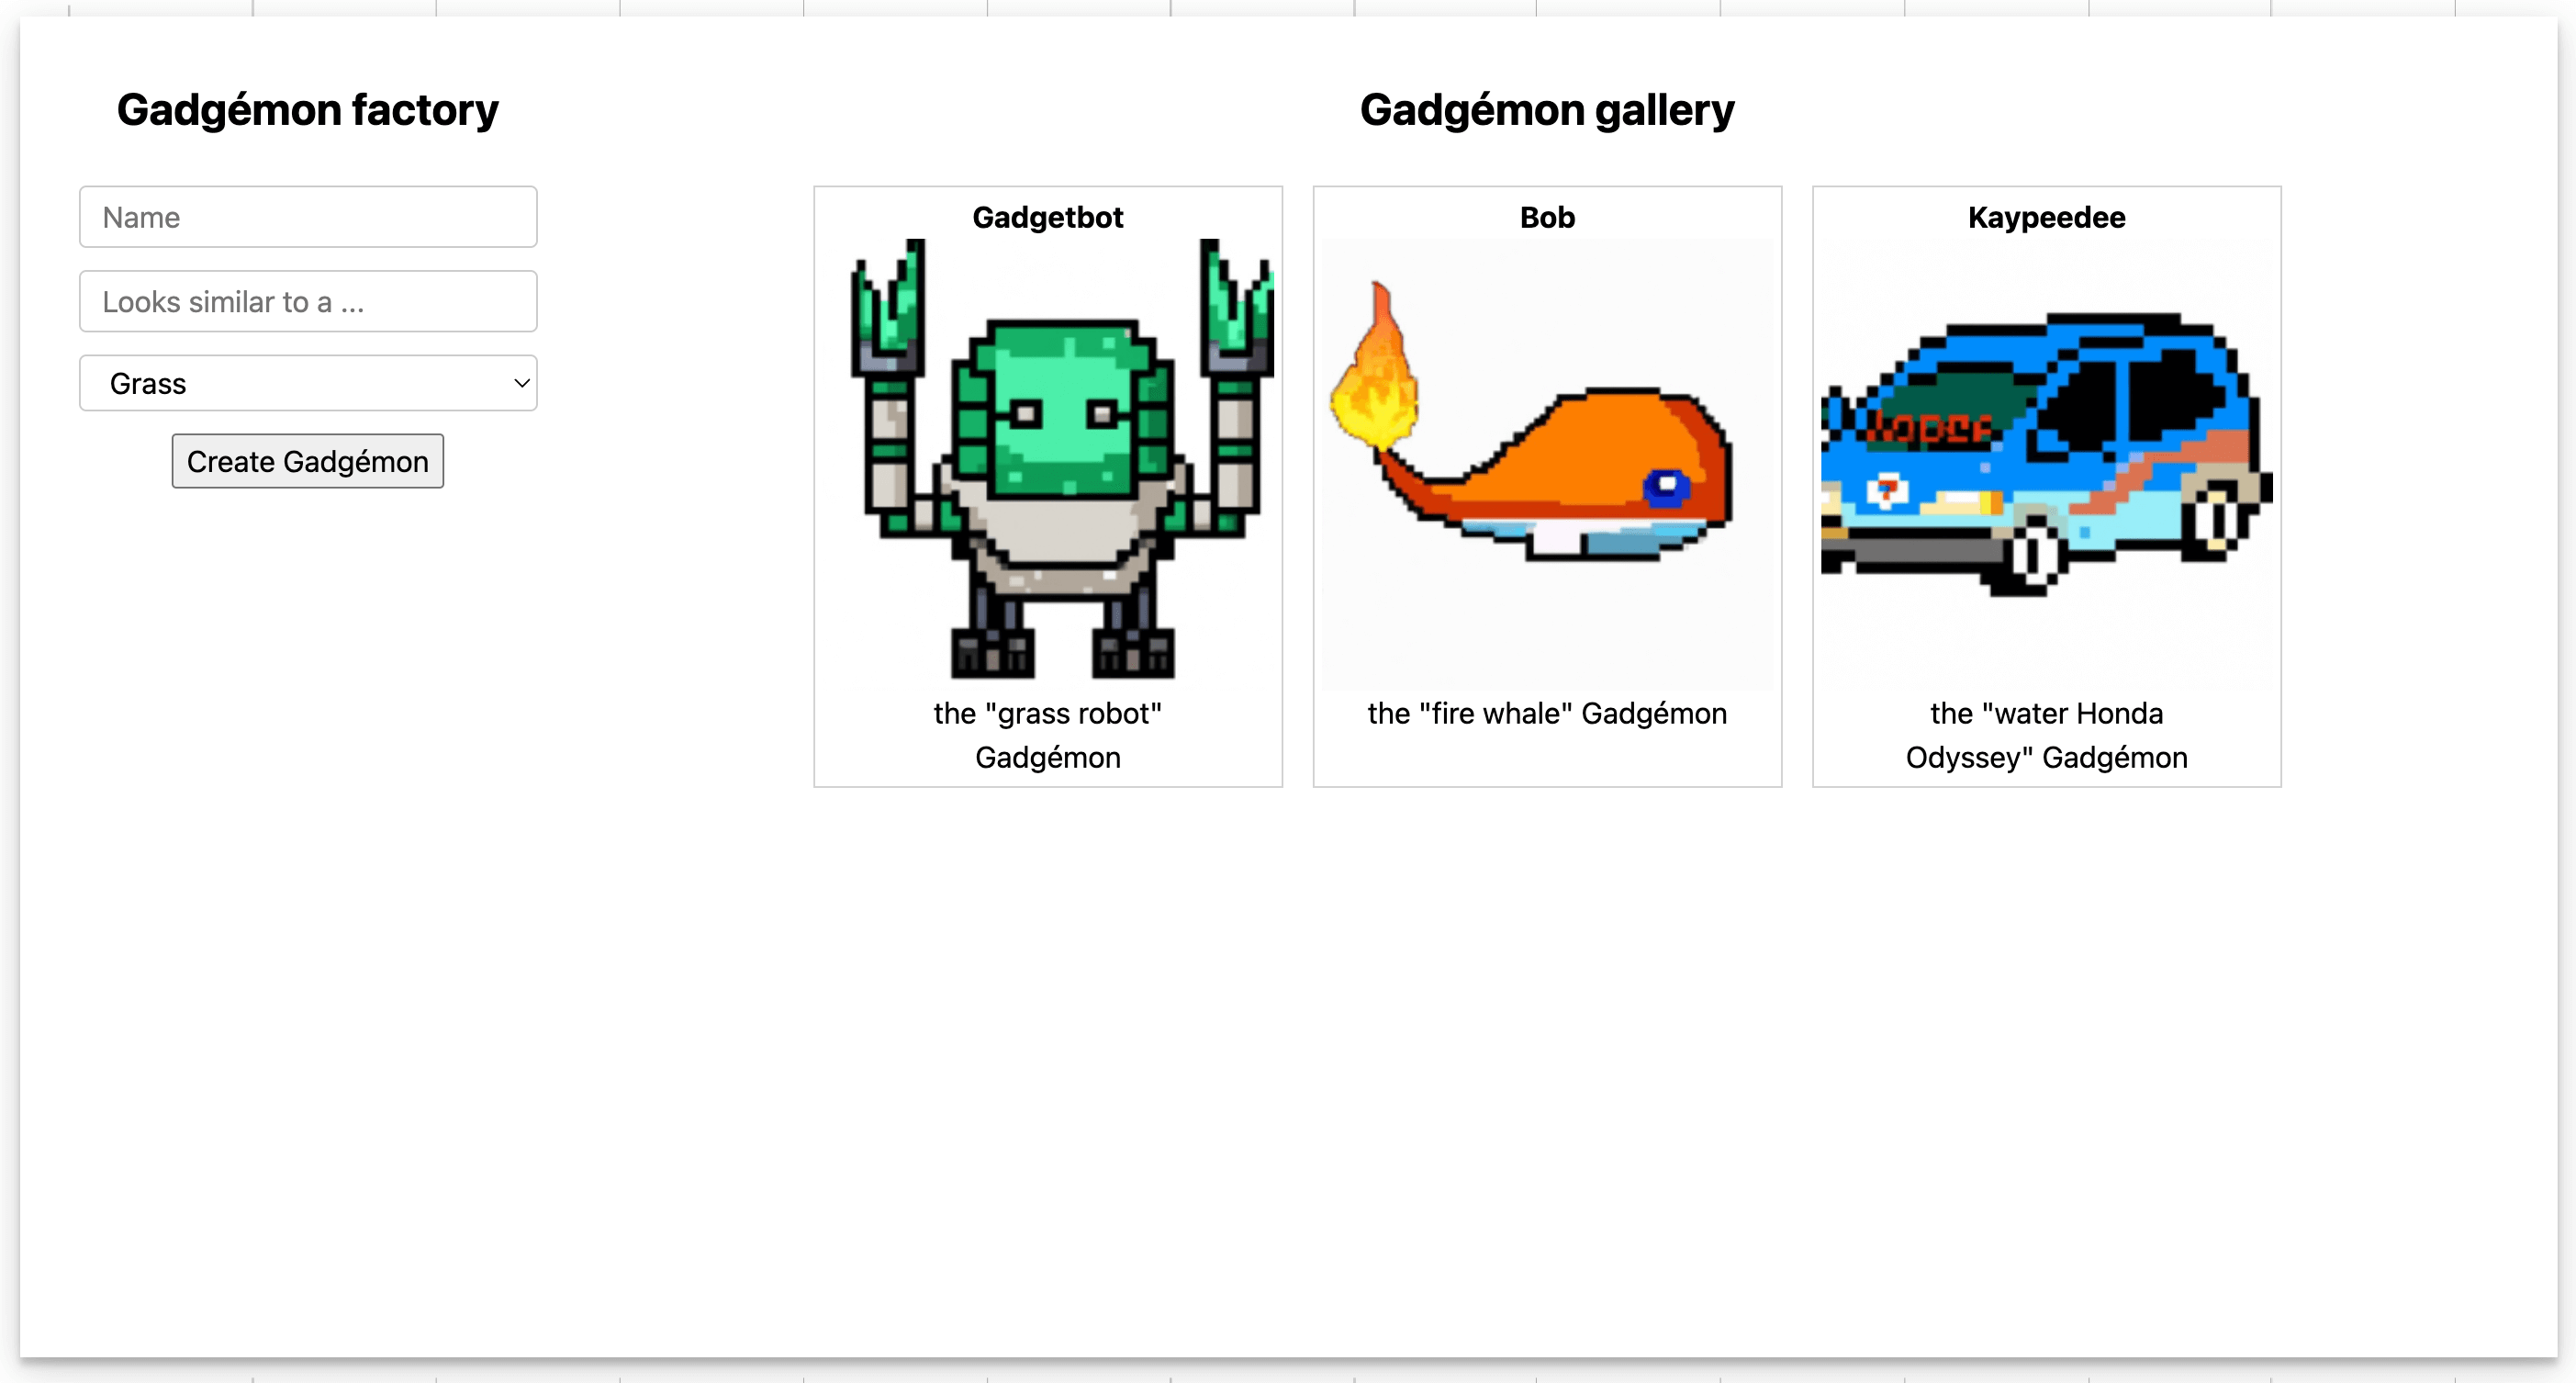 A screenshot of the completed app. There are 3 Gadgemon visible in the app frontend, Gadgetbot the grass robot, Bob the fire whale, and Kaypeedee the water Honda Odyssey minivan. The form with Name, Looks similar to a ... and element fields is present, but empty.